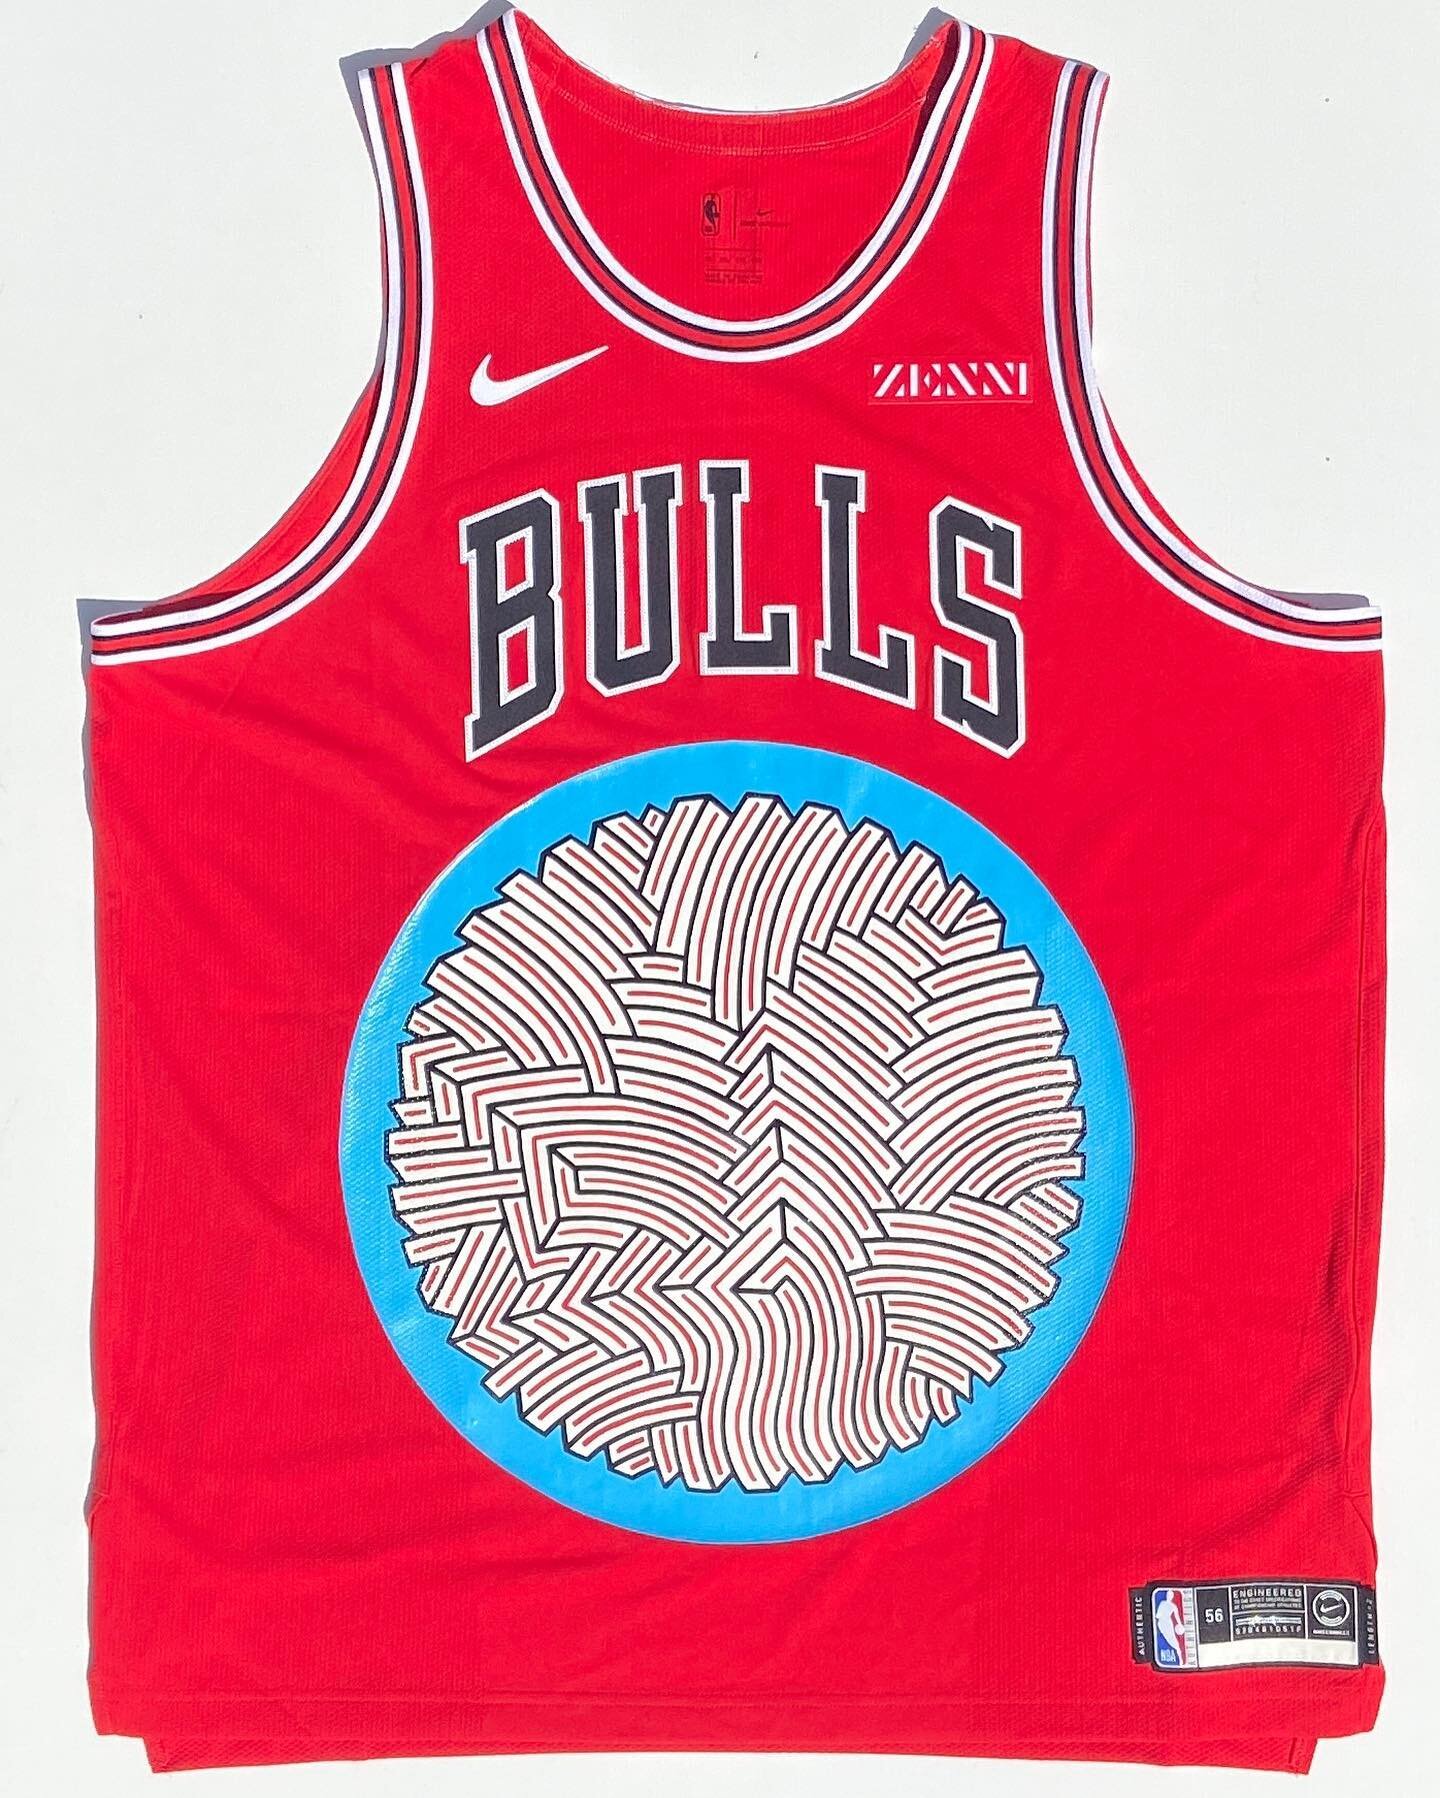 &ldquo;On The Team&rdquo; a jersey I painted for the @chicagobulls as part of a Bulls themed art show at The United Center during Bulls Fest. Proud to be hanging alongside so many artists I admire. Show presented and curated by @allstarpresschicago .